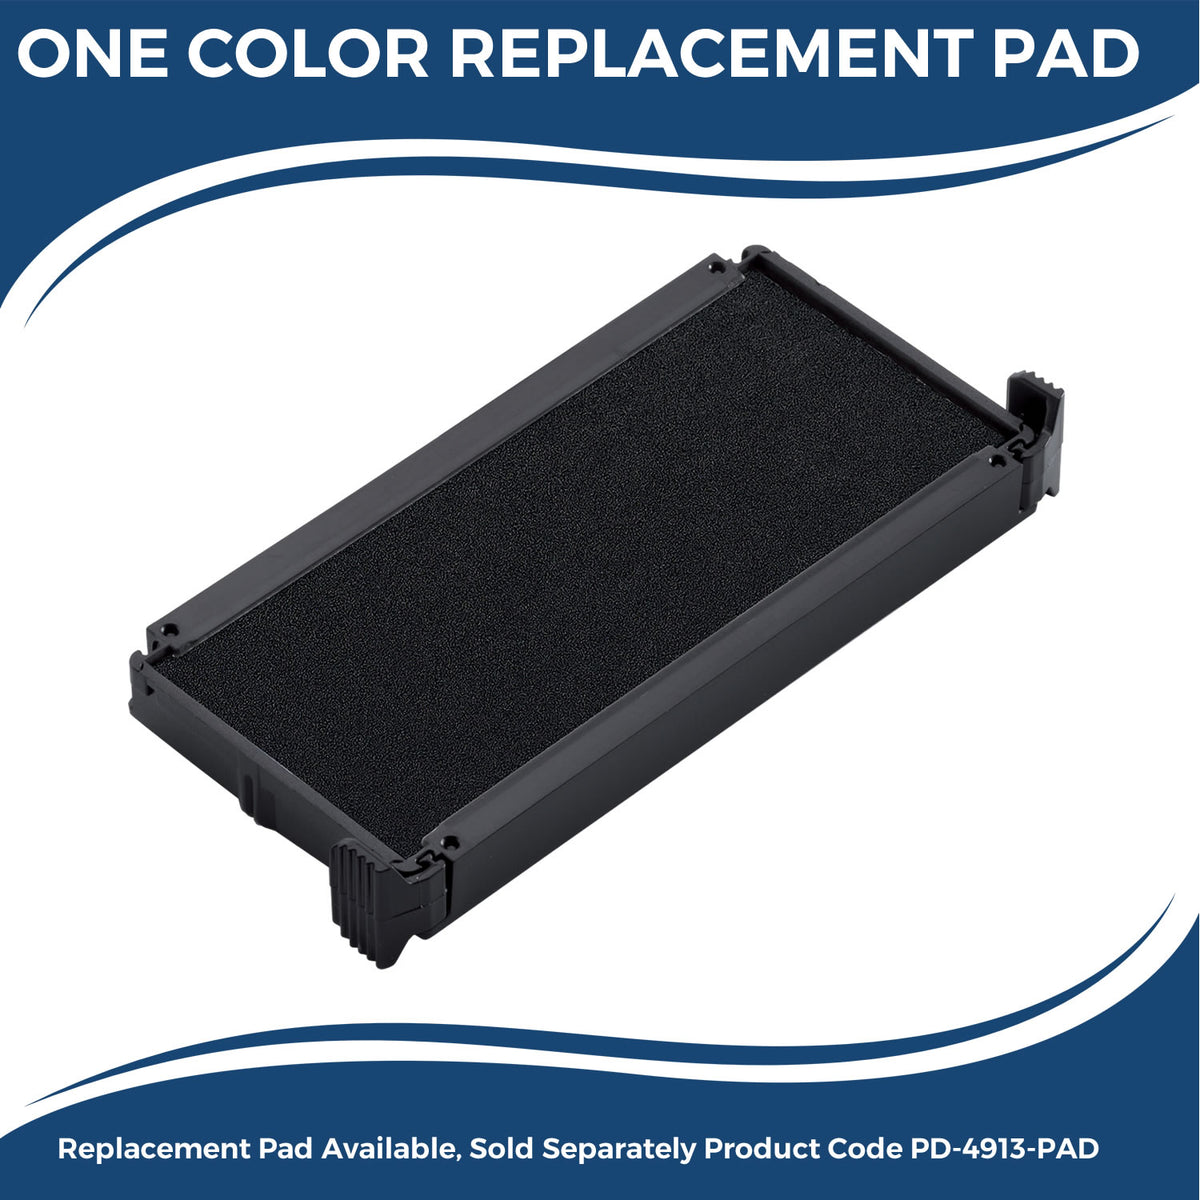 Large Self-Inking Surface Stamp 5563S Large Replacment Pad